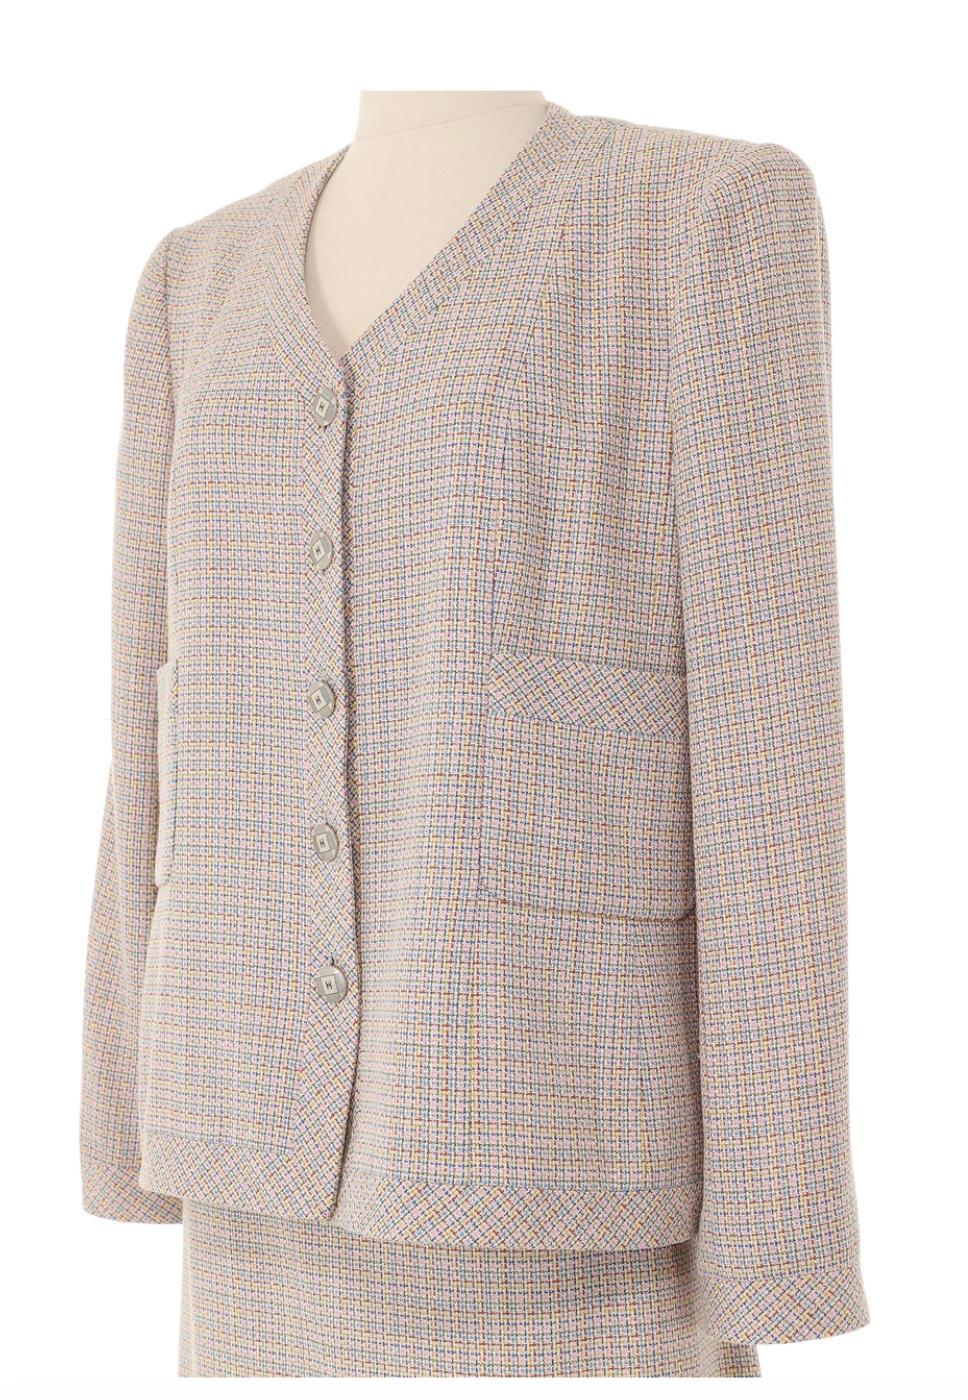 Chanel Spring 1998 Cream Multicolored Skirt Suit. From the 1998 Chanel collection by Karl Lagerfeld, this skirt suit strikes a balance between sophistication and playfulness. The mulitcolored tweed adds a fun detail to a classic Chanel silhouette.